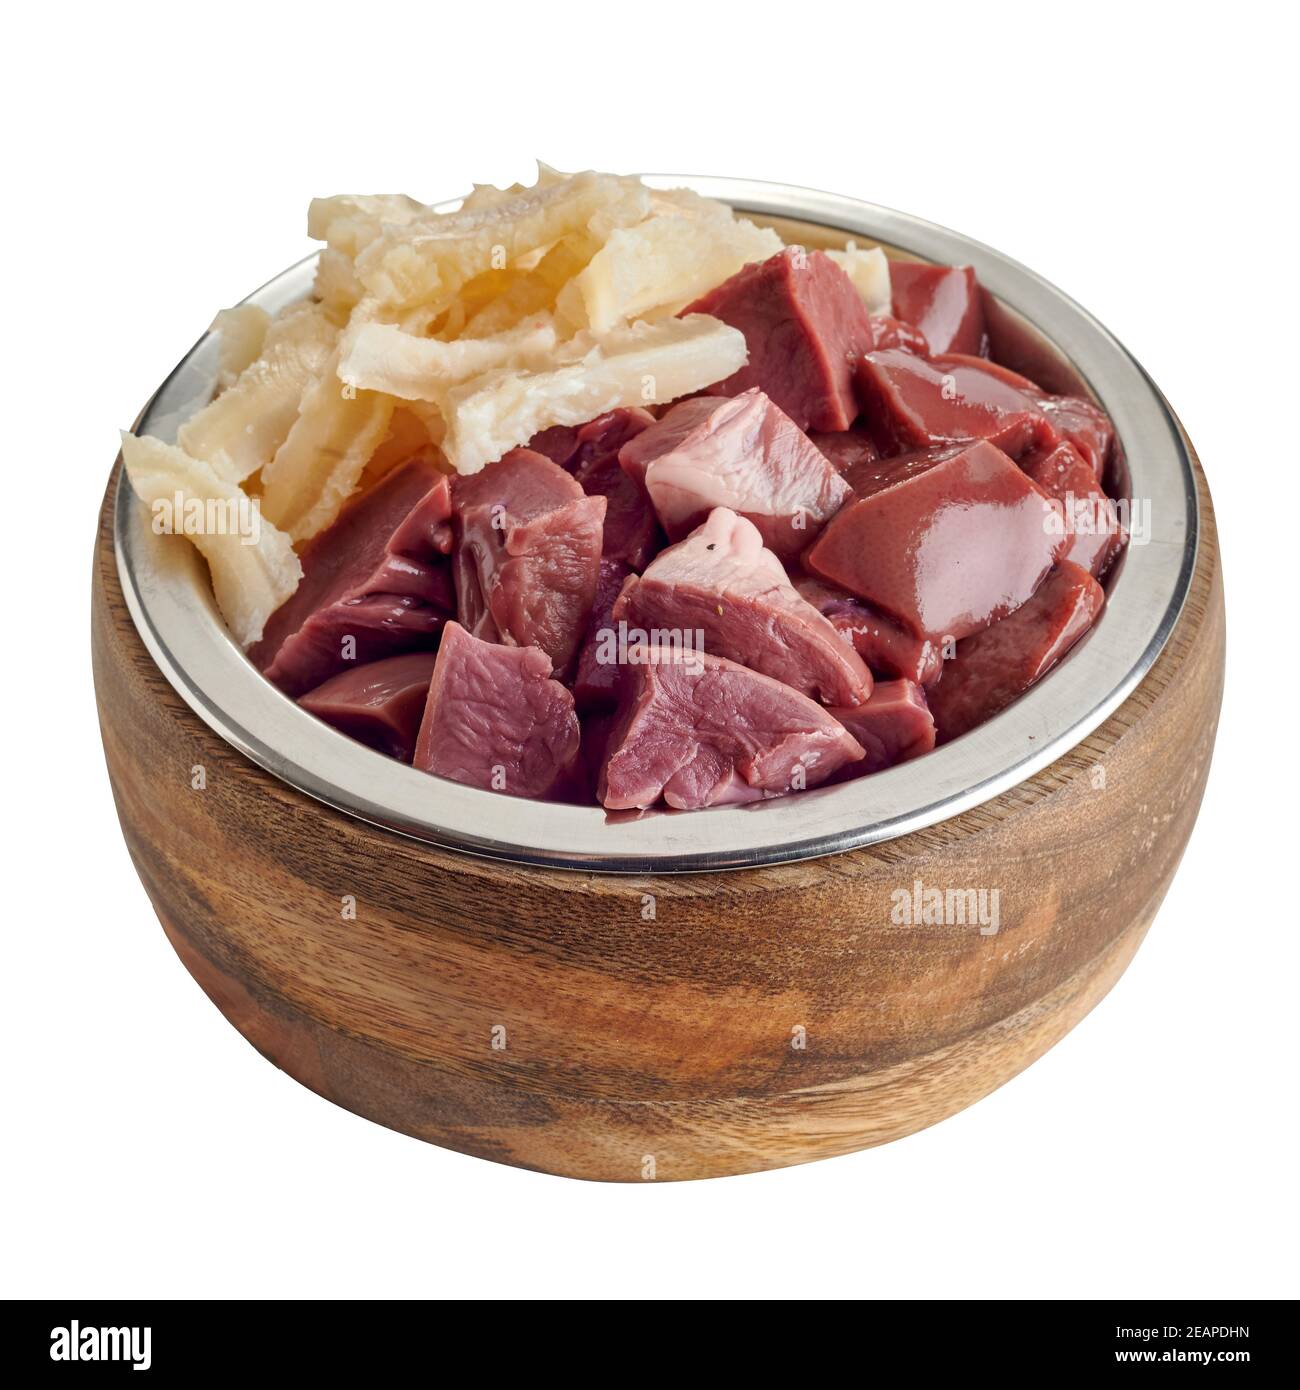 Ideal pet nutrition concept for dogs and cats with fresh offal or barf including raw liver, pluck and tripe in a metal and wood bowl isolated on white Stock Photo